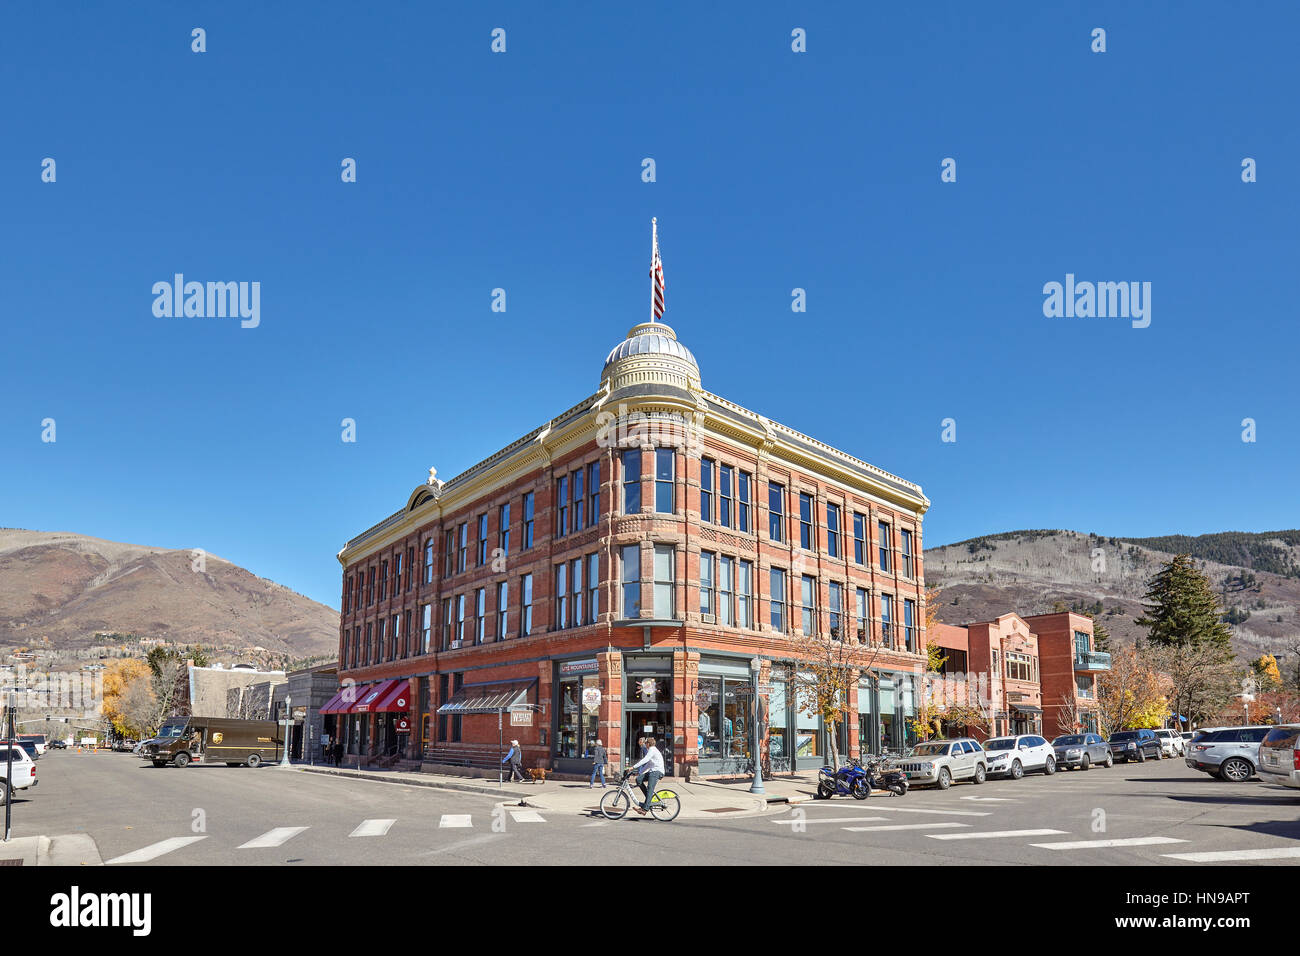 Aspen, USA - November 20, 2016: Elks Building on South Galena Street. Aspen is one of the world's most famous ski resorts. Stock Photo